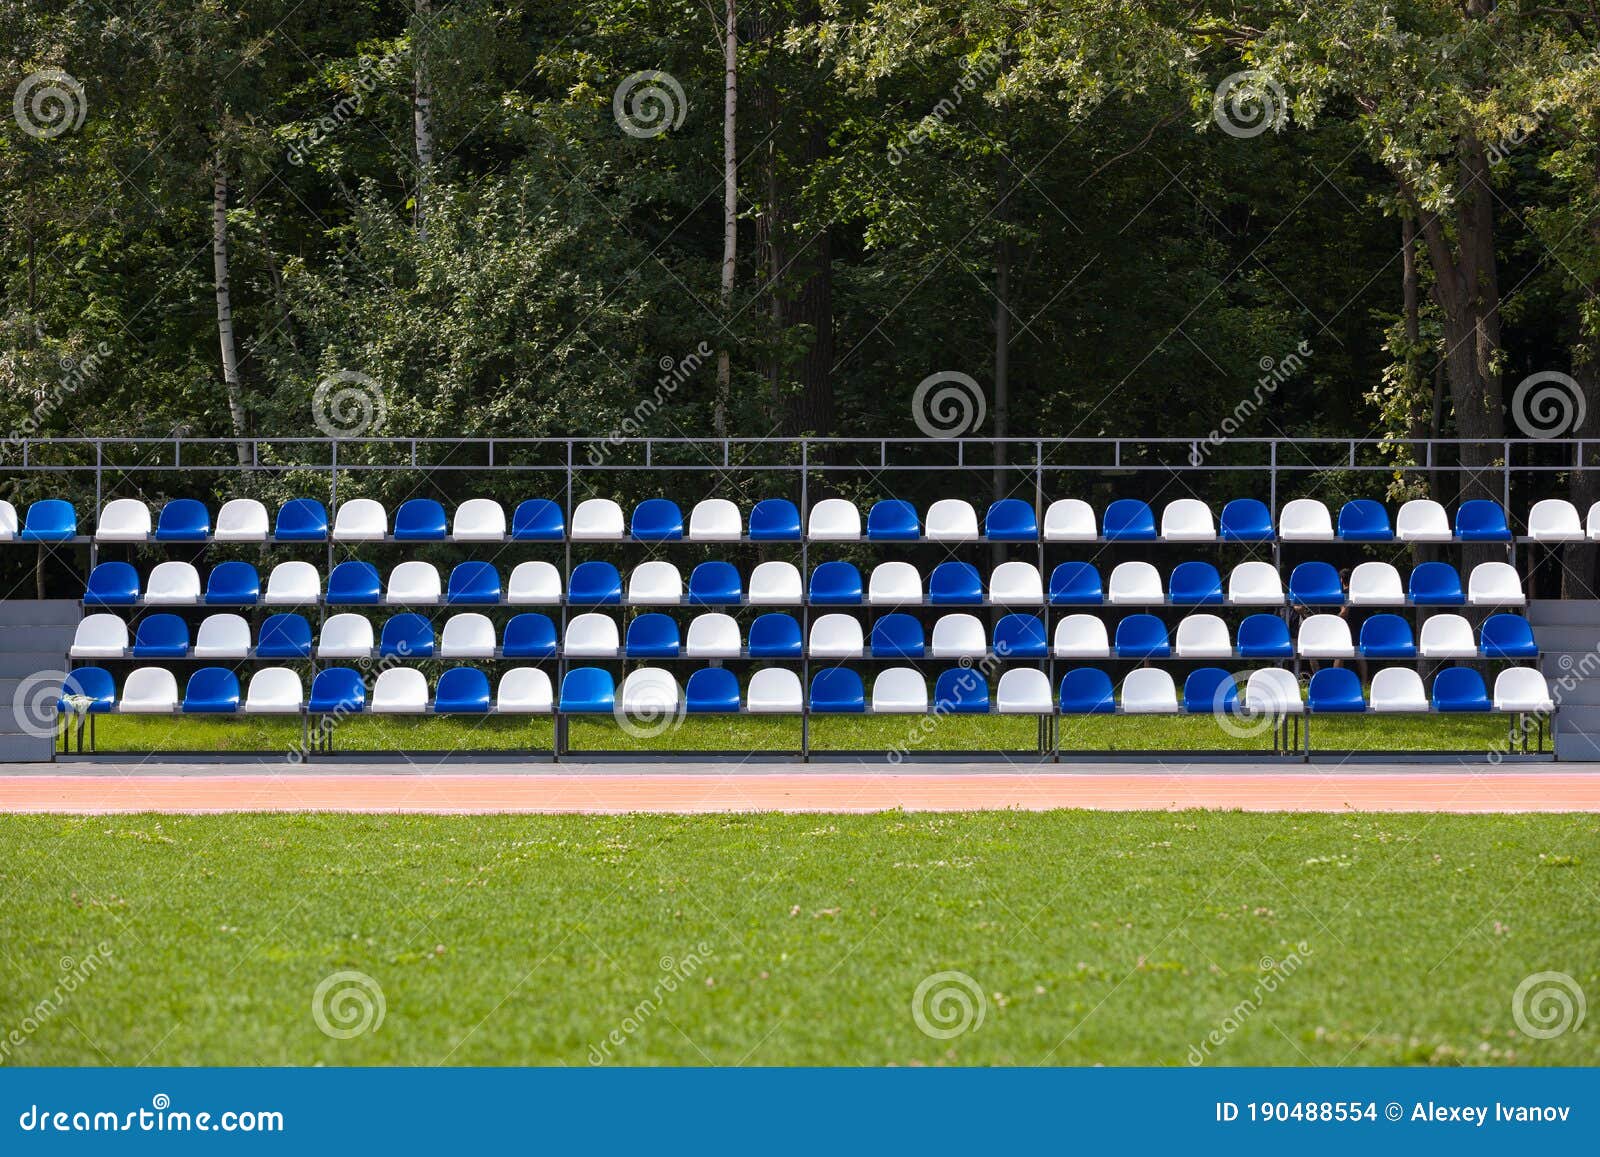 Empty Blue and White Seats in a Football or Soccer Stadium